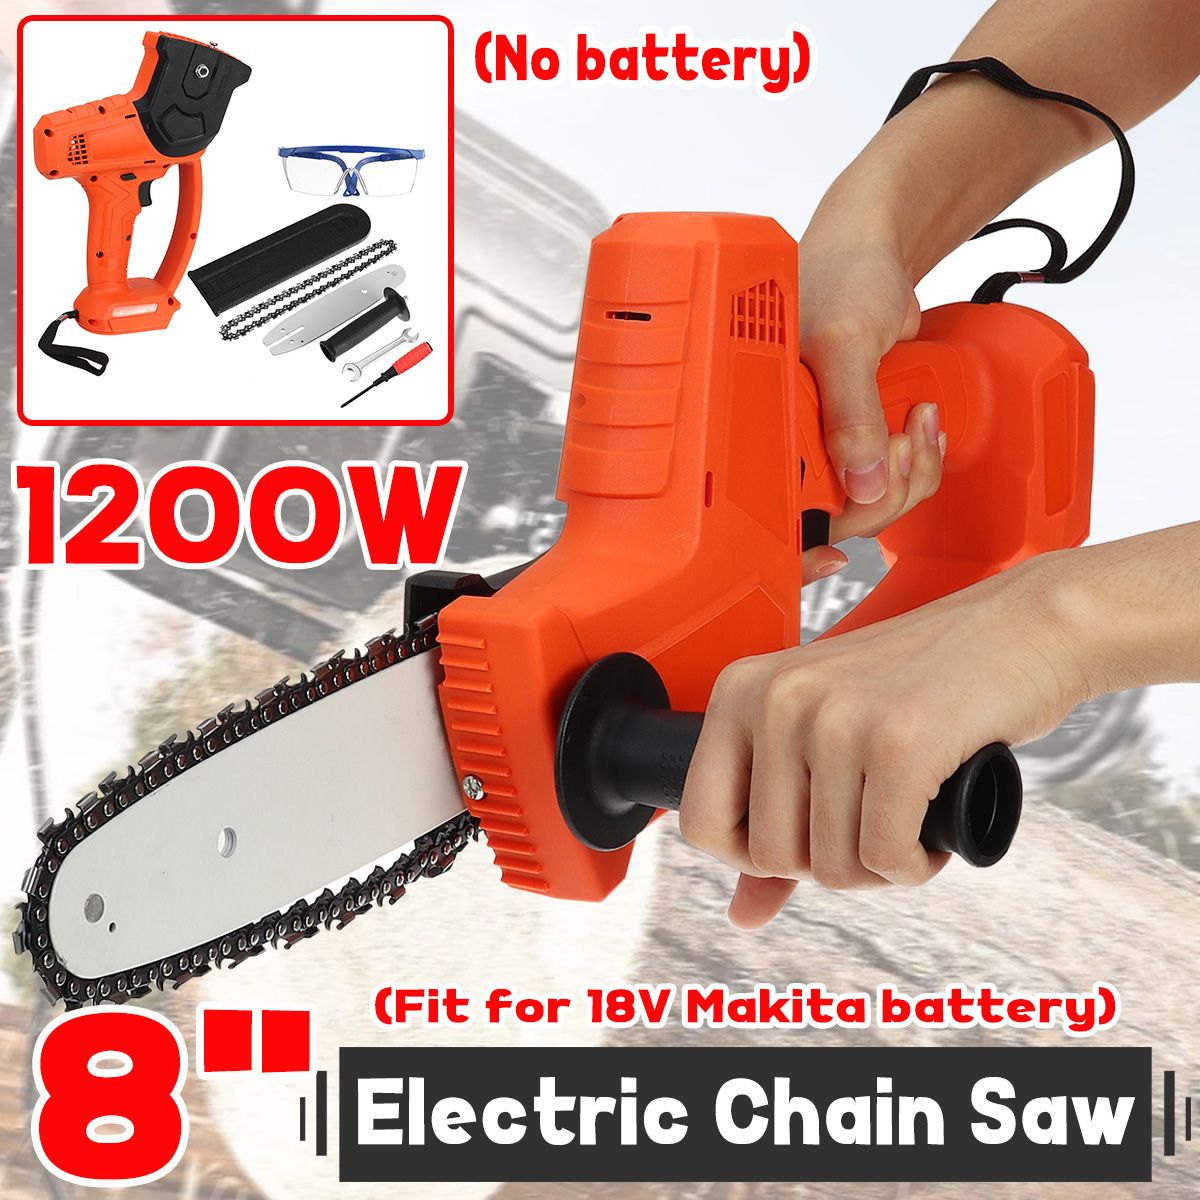 8-Inch-Cordless-Electric-Chain-Saw-Multifunctional-Wood-Cutting-Tool-For-Makita-18V-Battery-1751298